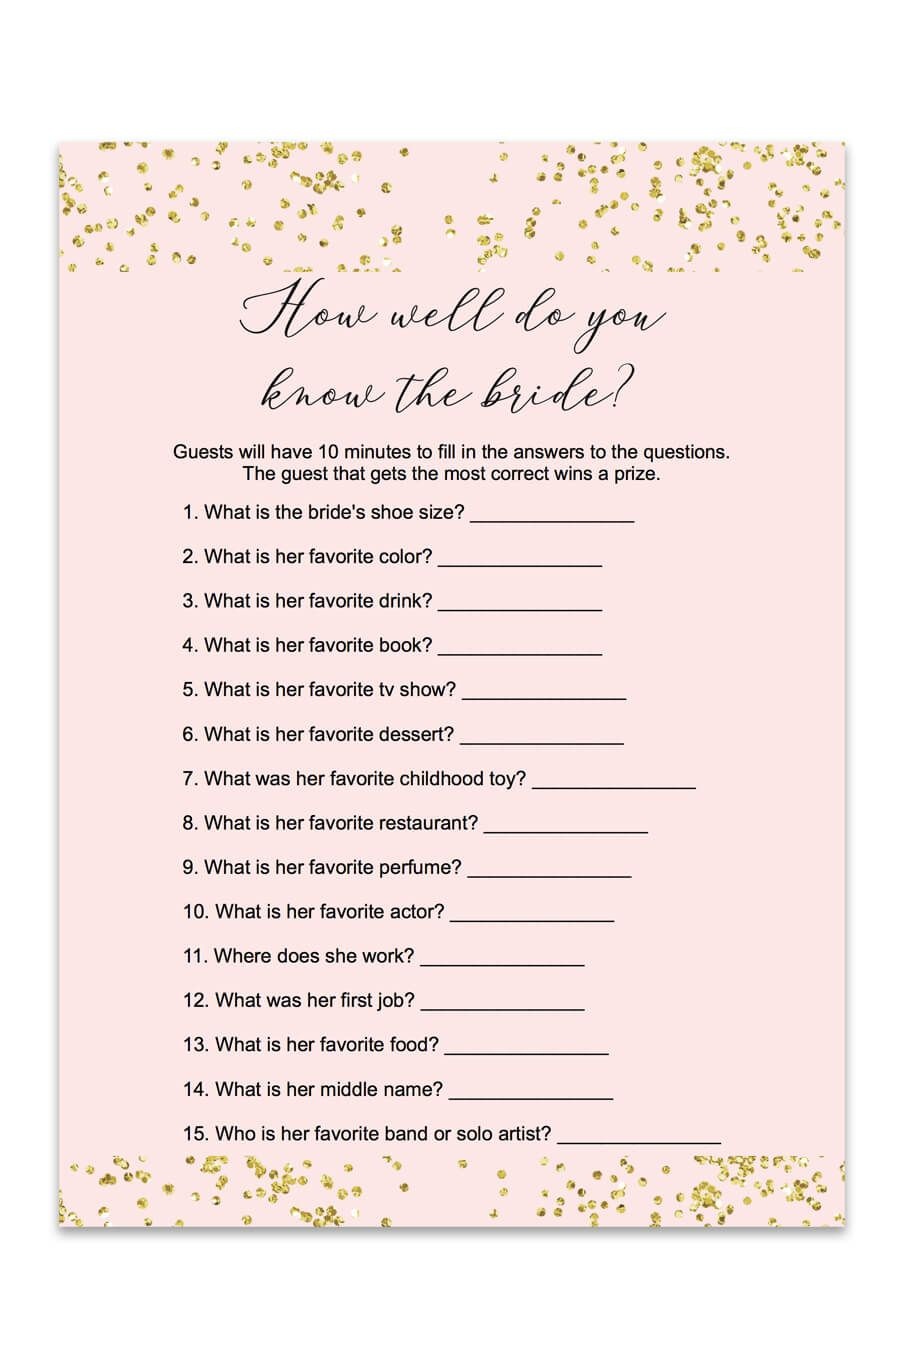 Blush And Confetti How Well Do You Know The Bride Game | Love&amp;lt;3 - How Well Do You Know The Bride Game Free Printable